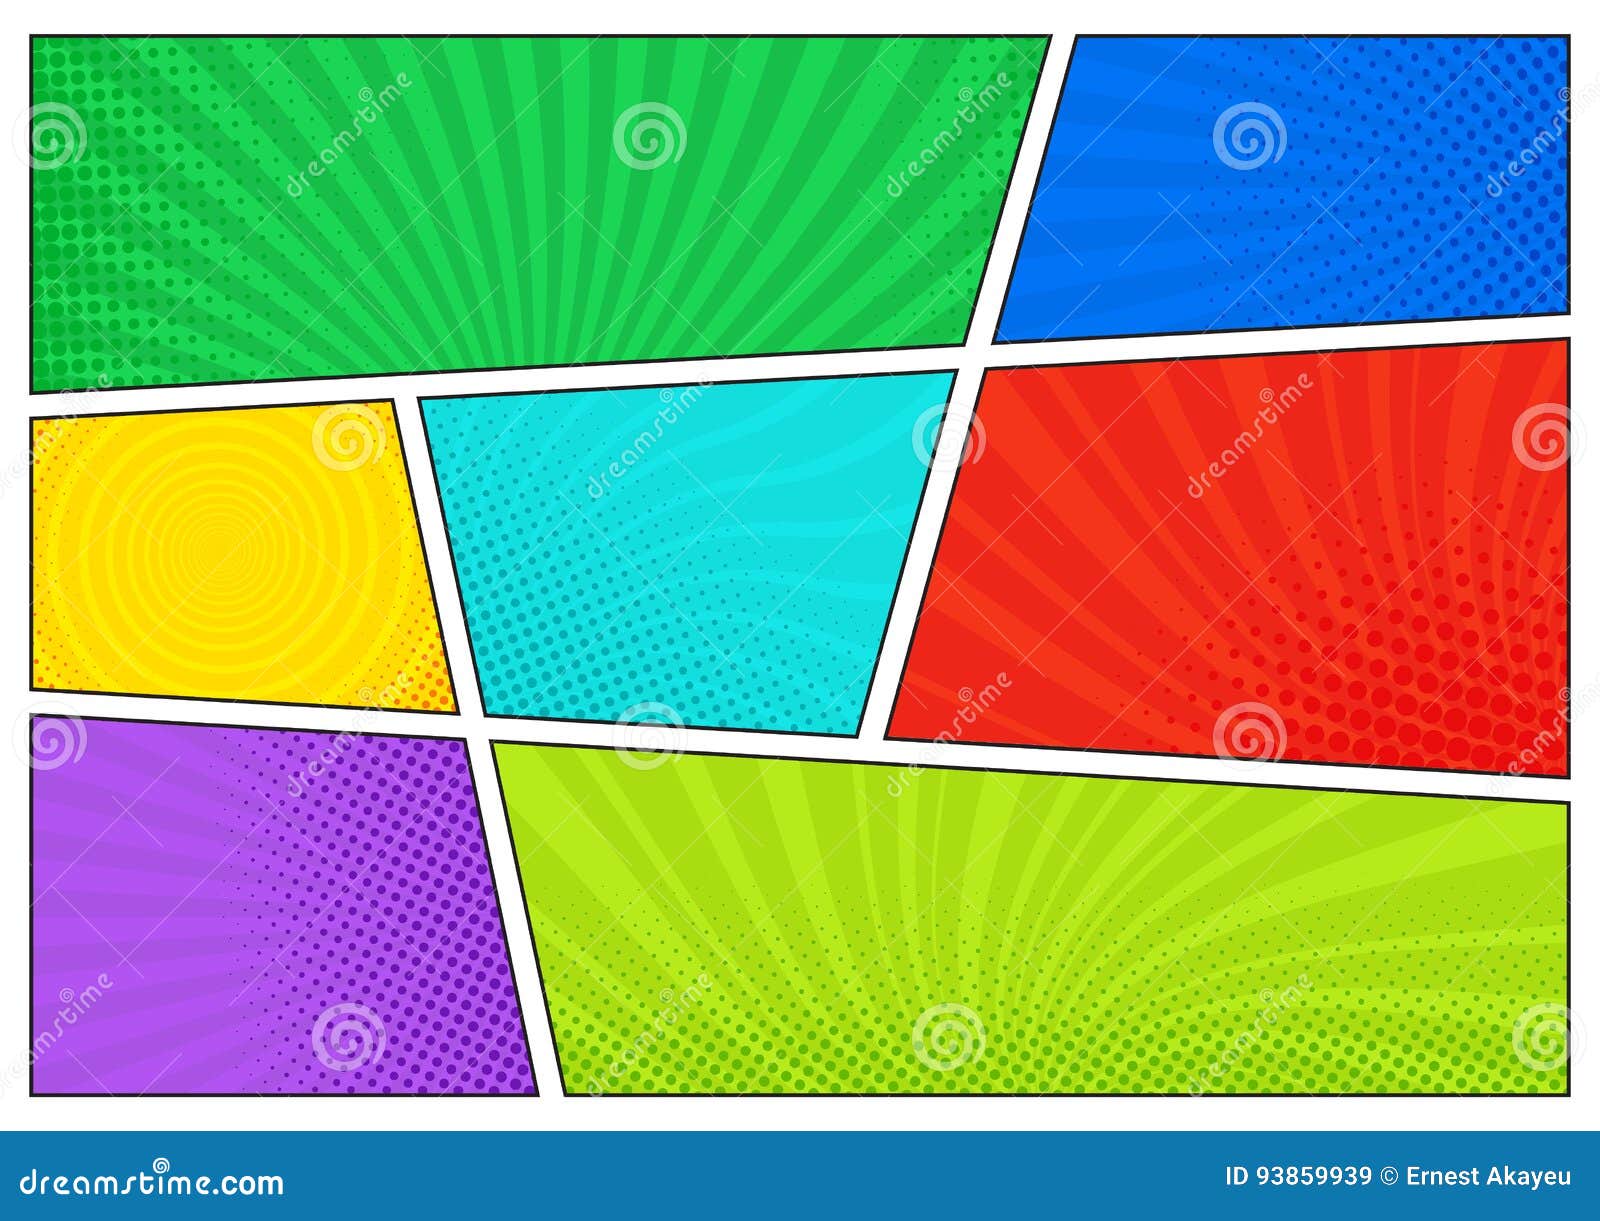 horizontal comics backdrop. bright template with cells, halftone effects and rays.  colorful background in pop-art